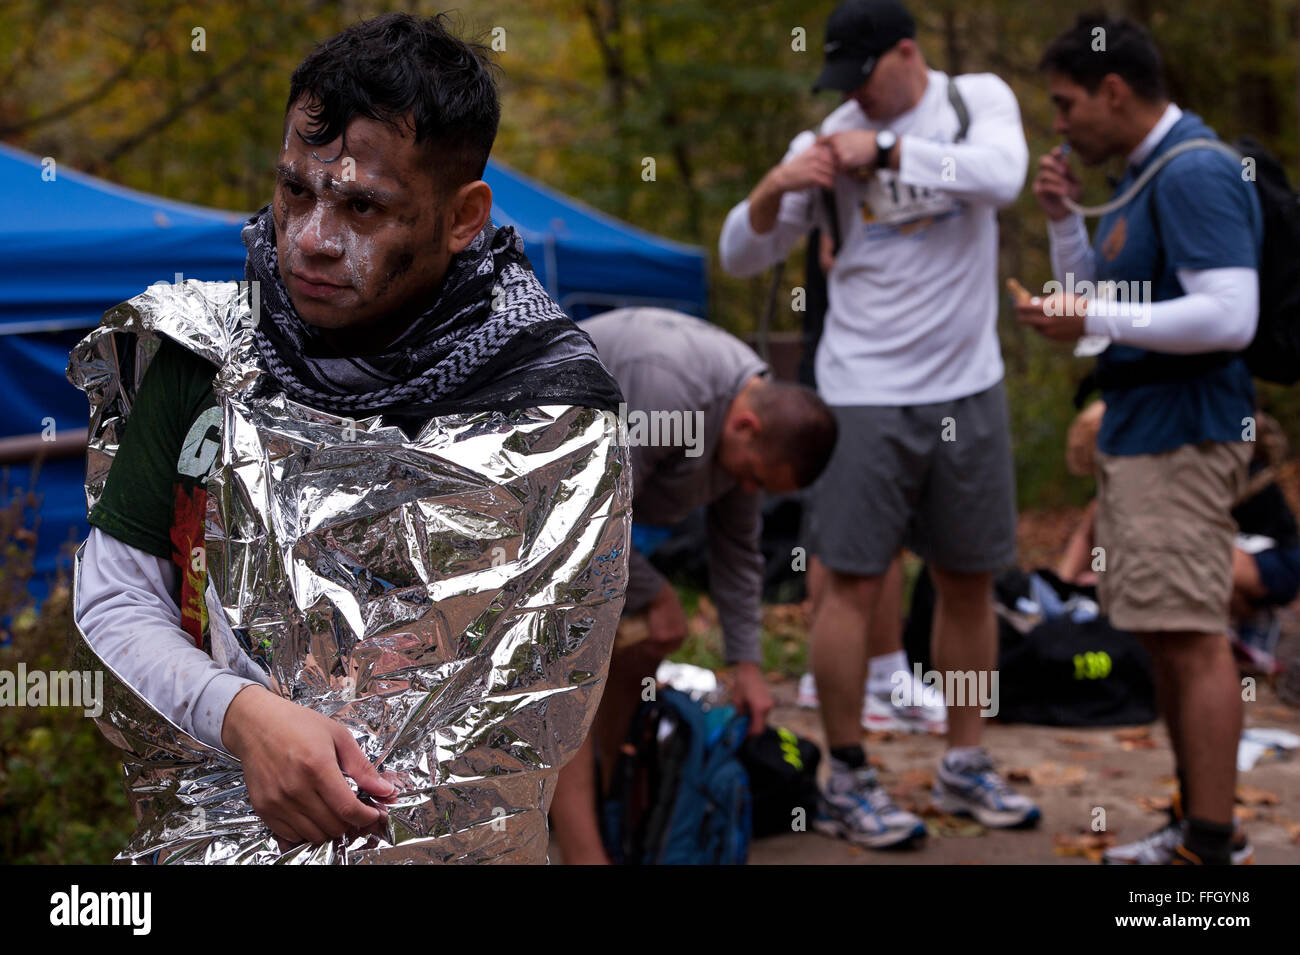 After a 7-mile duckie race, Army Spc. Melvin Martinez-Meza covers himself in a thermal blanket so he won't lose body heat. Stock Photo